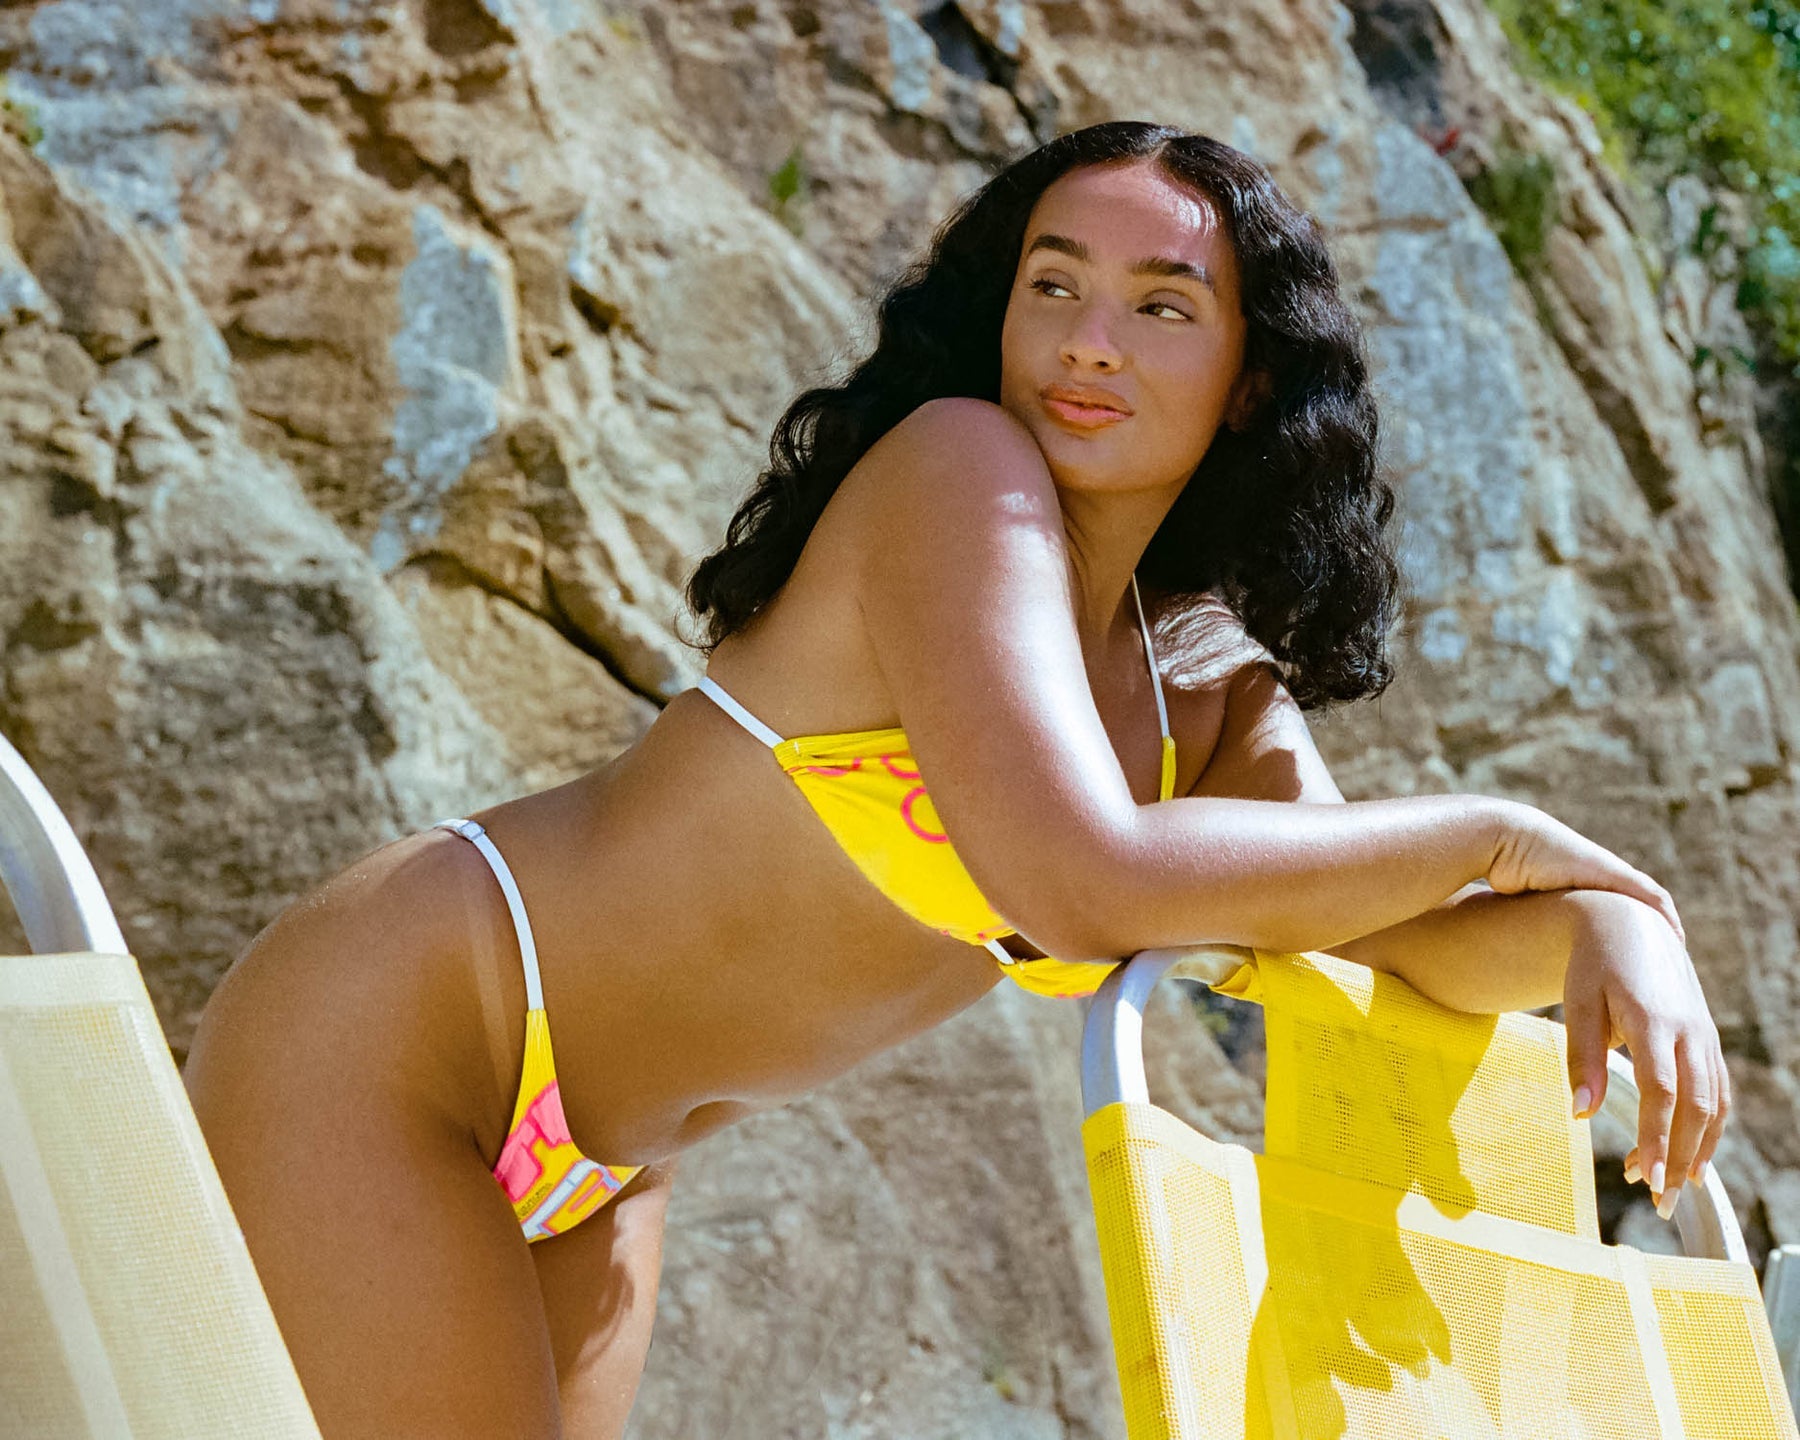 In vibrant nitro yellow, a model dons a bikini featuring the classic SUPER logo. The high-waisted thong design, combined with adjustable sides, makes this swimwear a bold and chic choice for a standout summer bikini look.